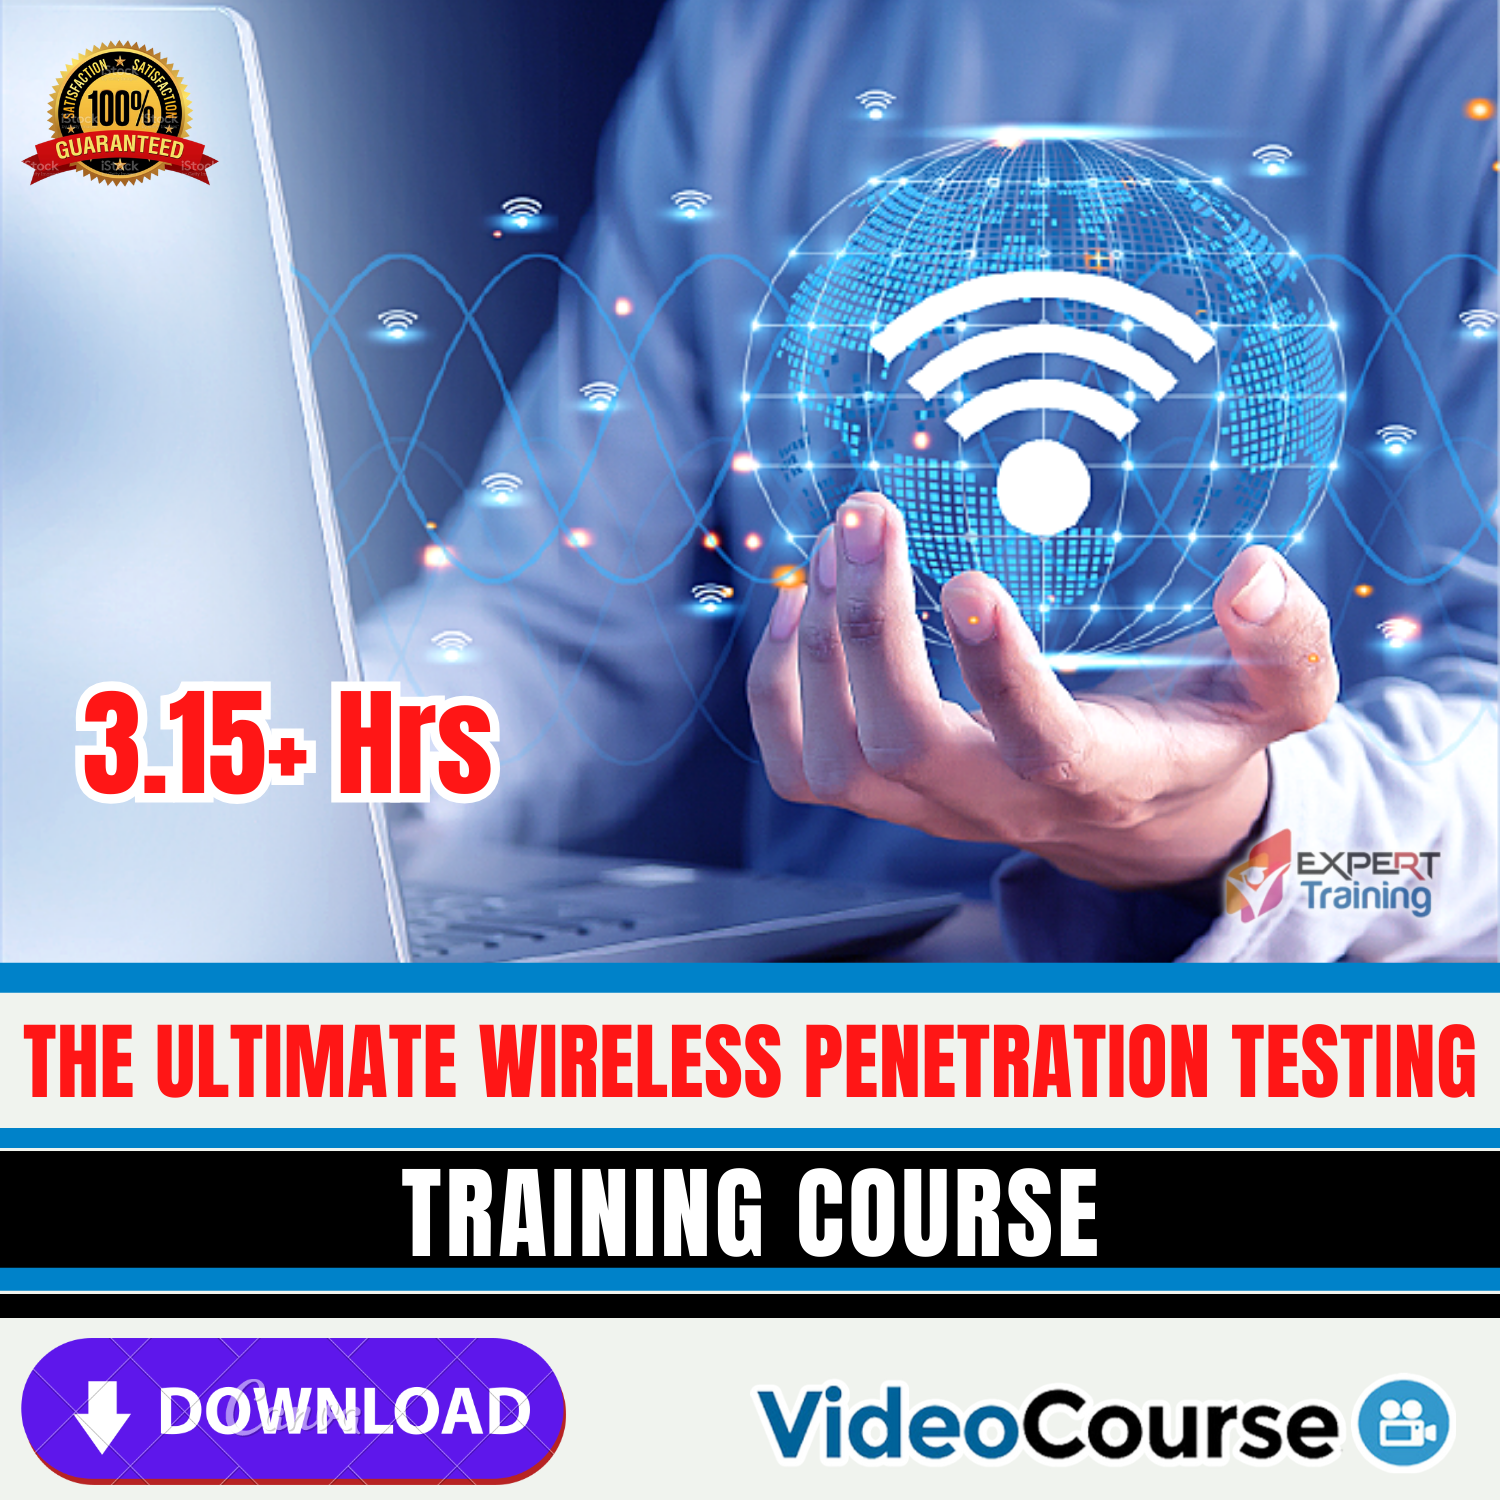 The Ultimate Wireless Penetration Testing Training Course